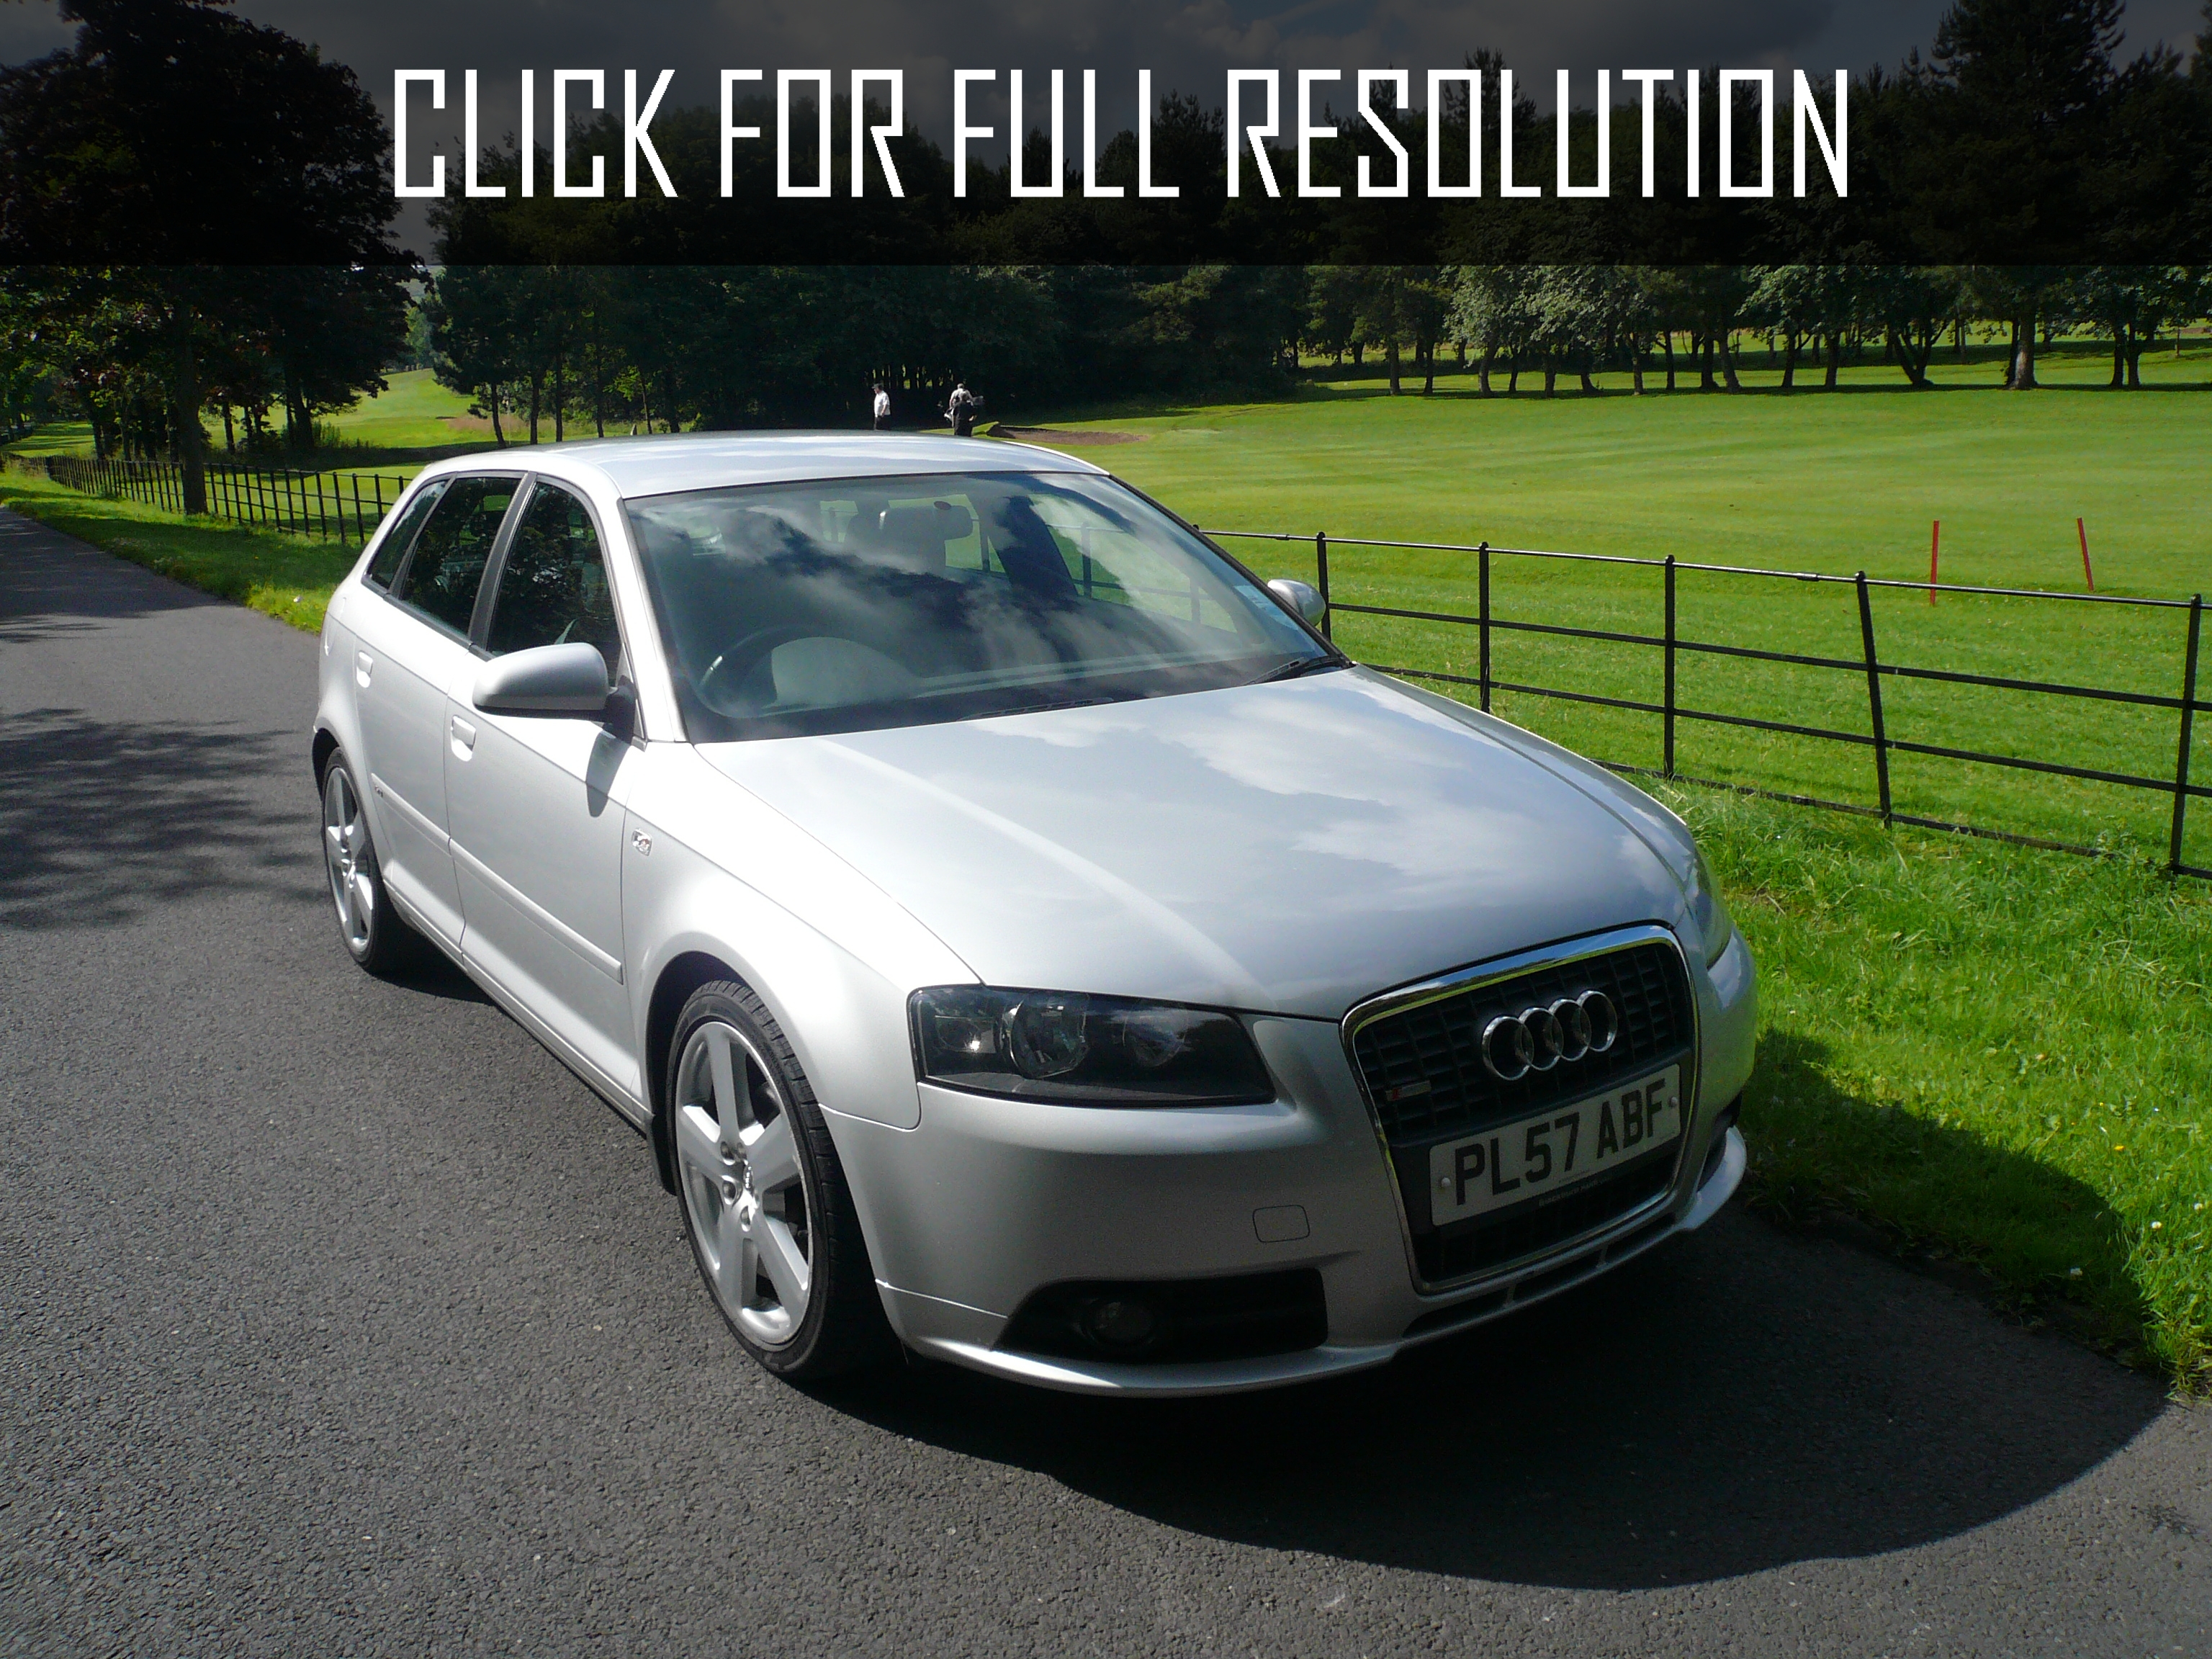 2005 Audi A3 S Line news, reviews, msrp, ratings with